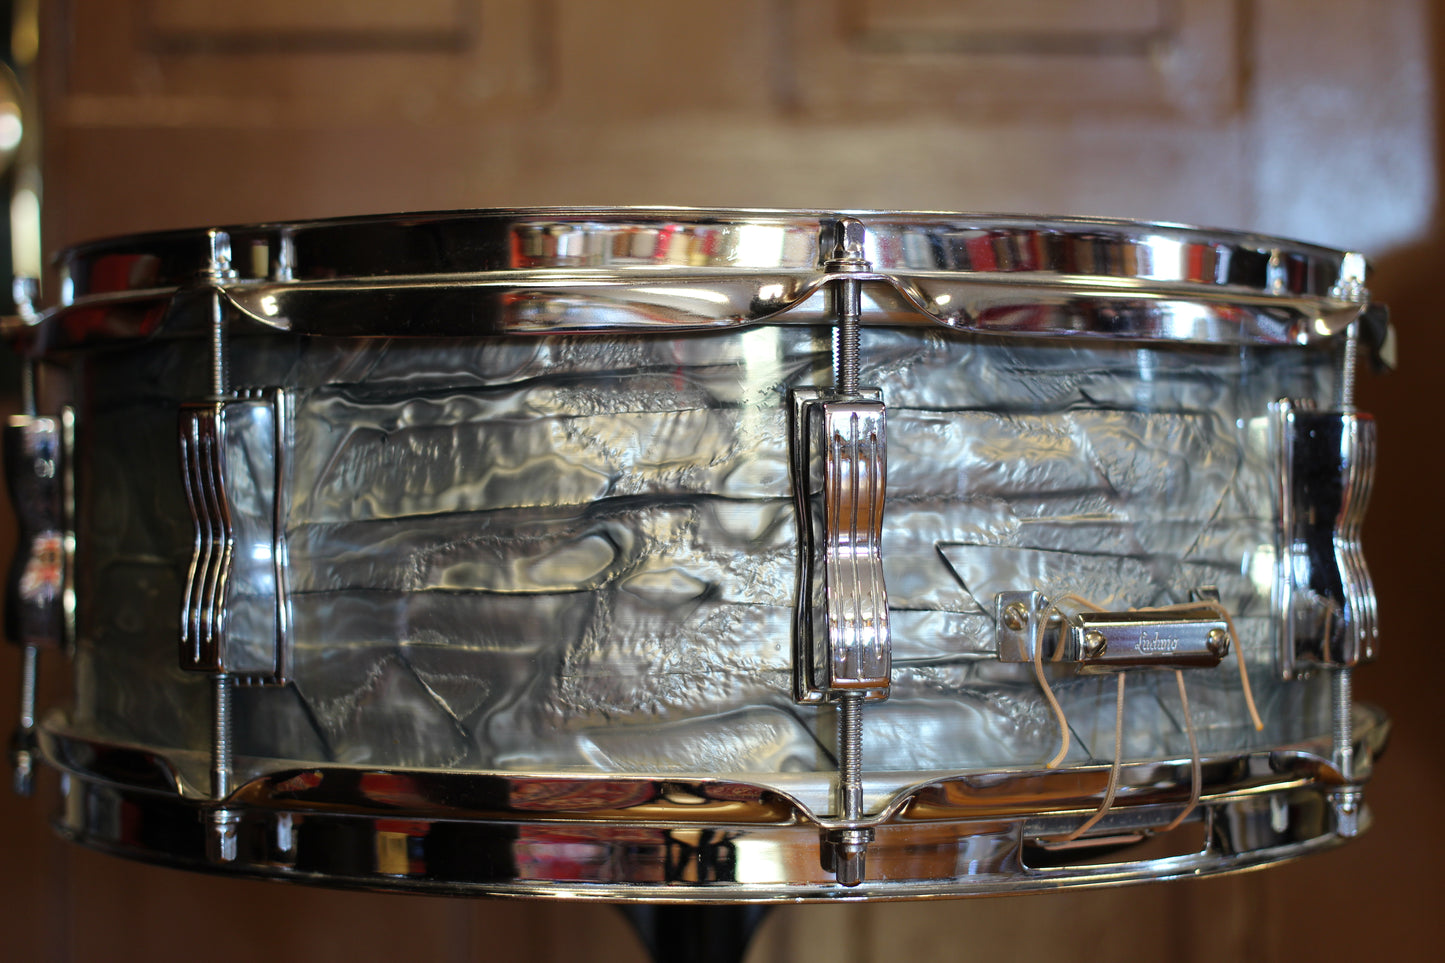 1964 Ludwig 5"x14" Jazz Festival Snare Drum in Sky Blue Pearl